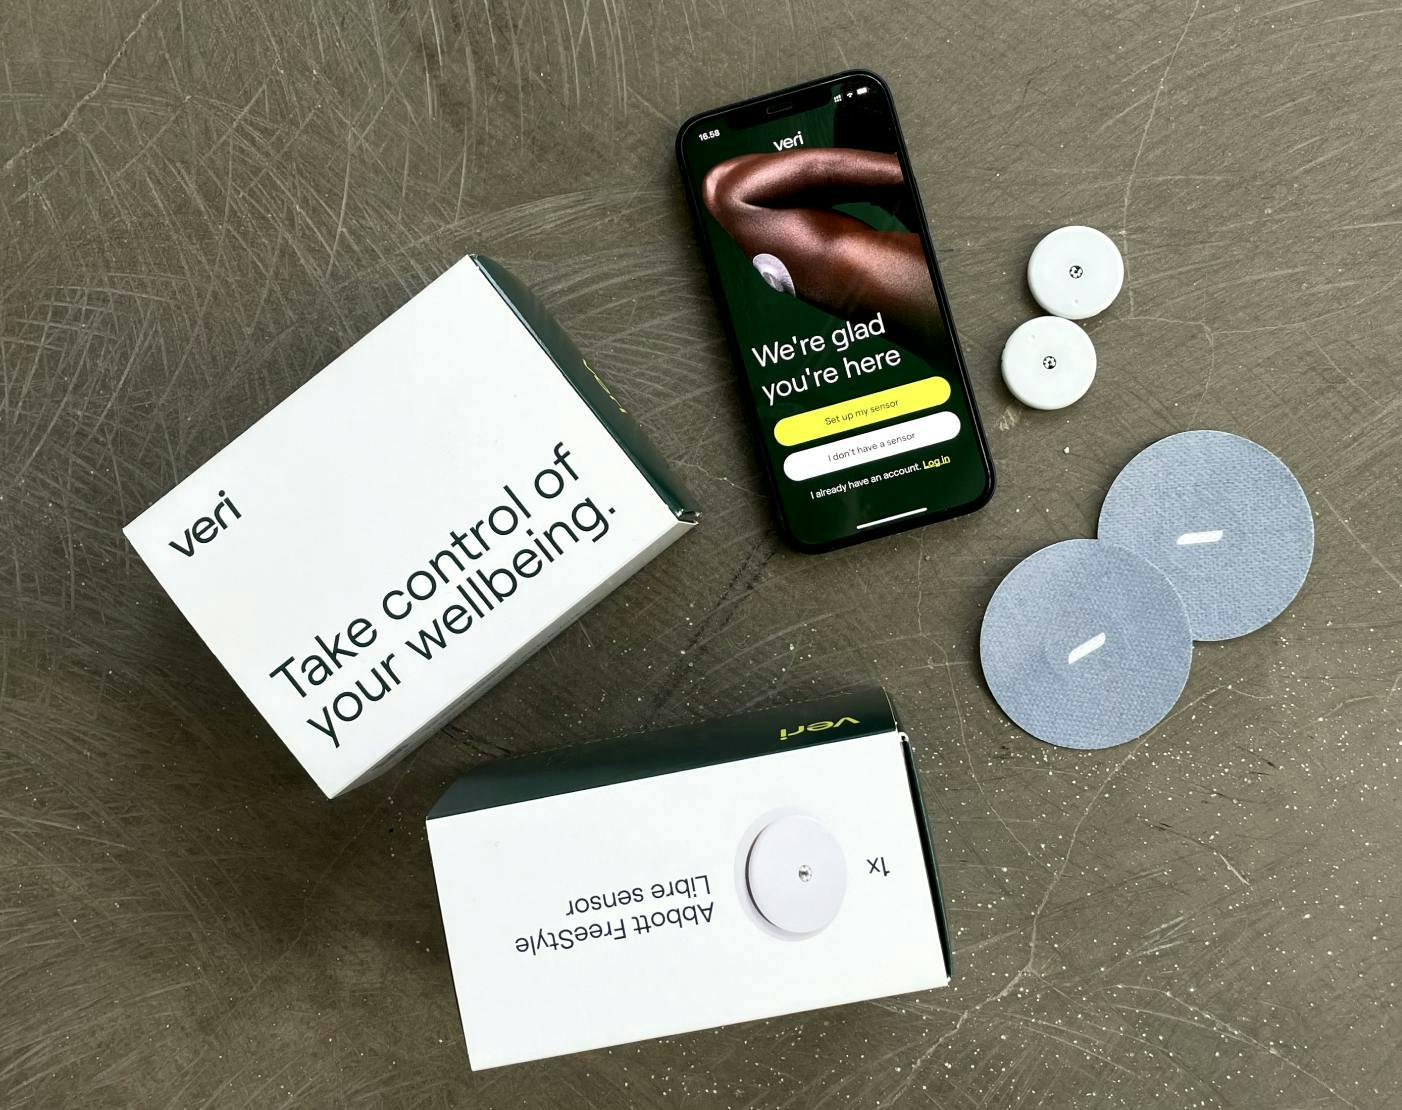 A Veri box is laid out on a table next to two CGM continuous glucose monitors and a mobile phone with the Veri app